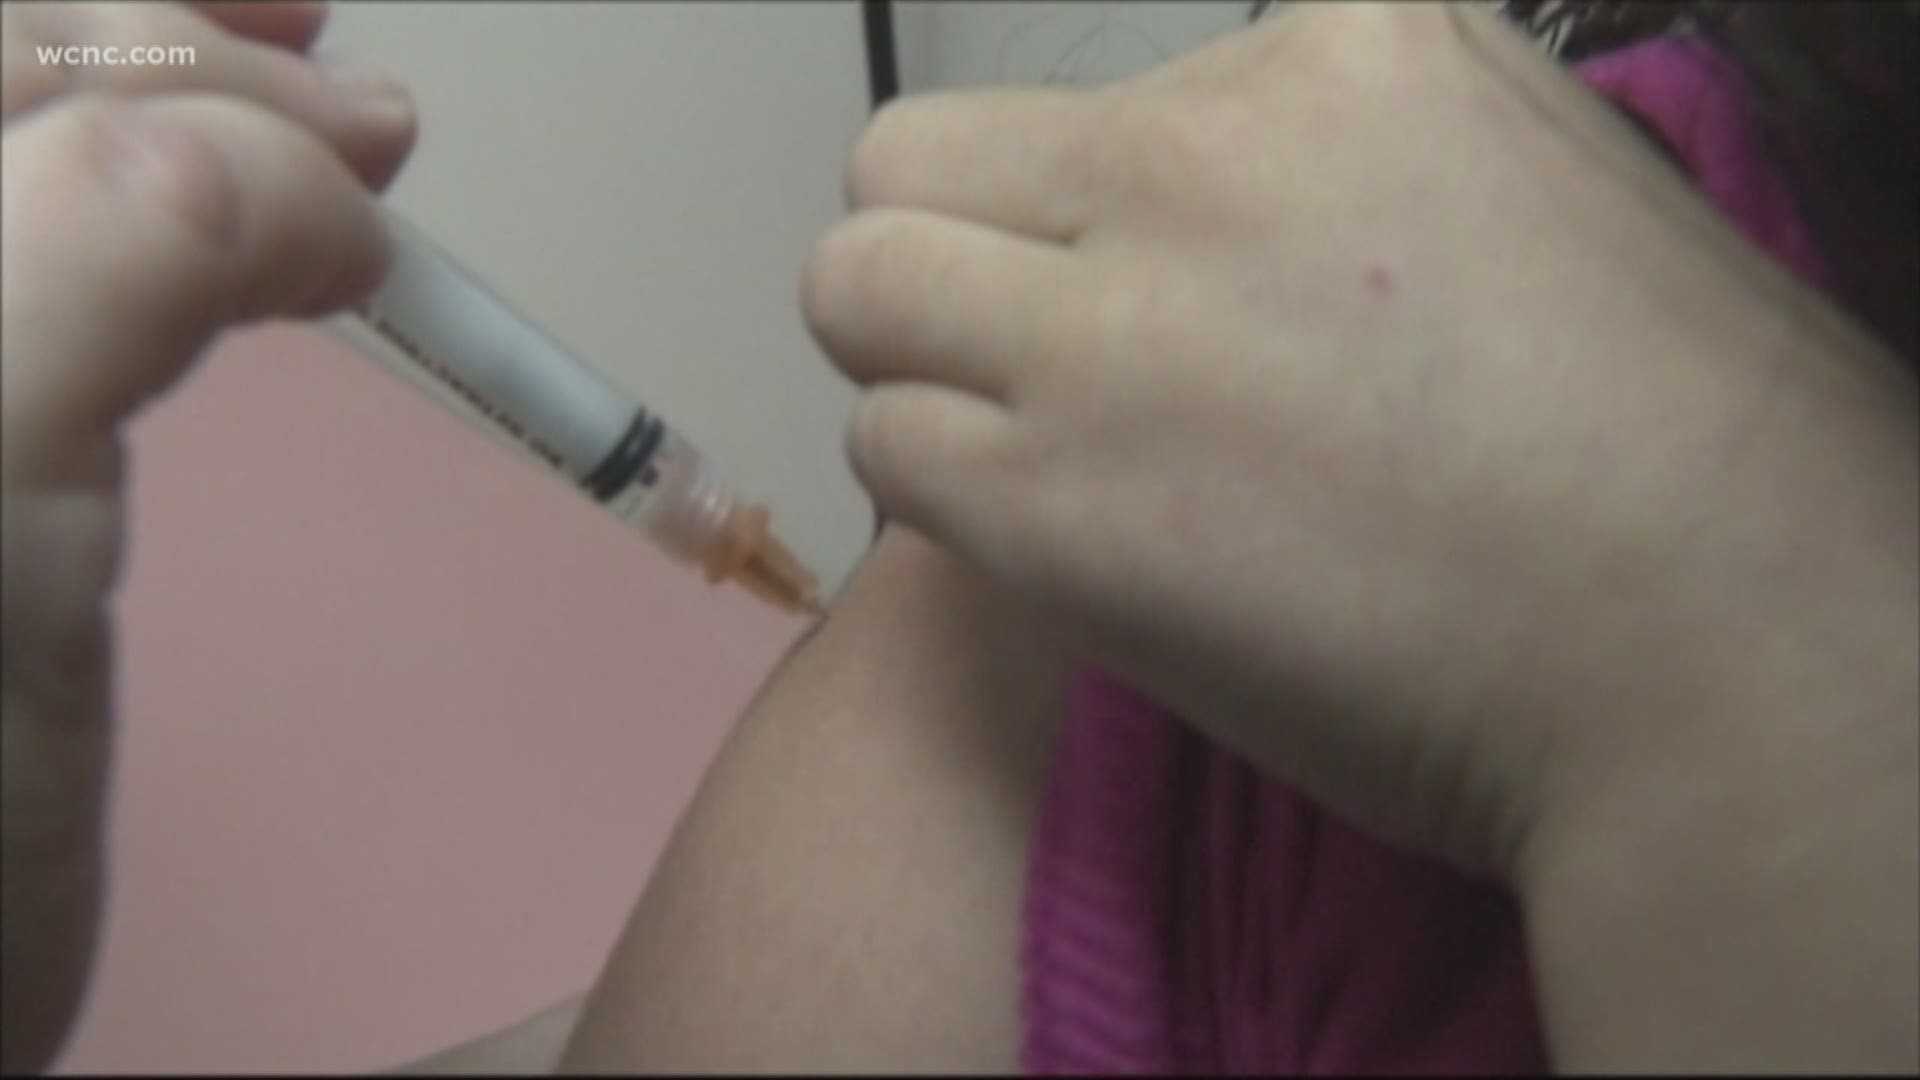 15 states have reported cases to the CDC so far this year, including Georgia. Local health officials are concerned measles could show up in the Carolinas.